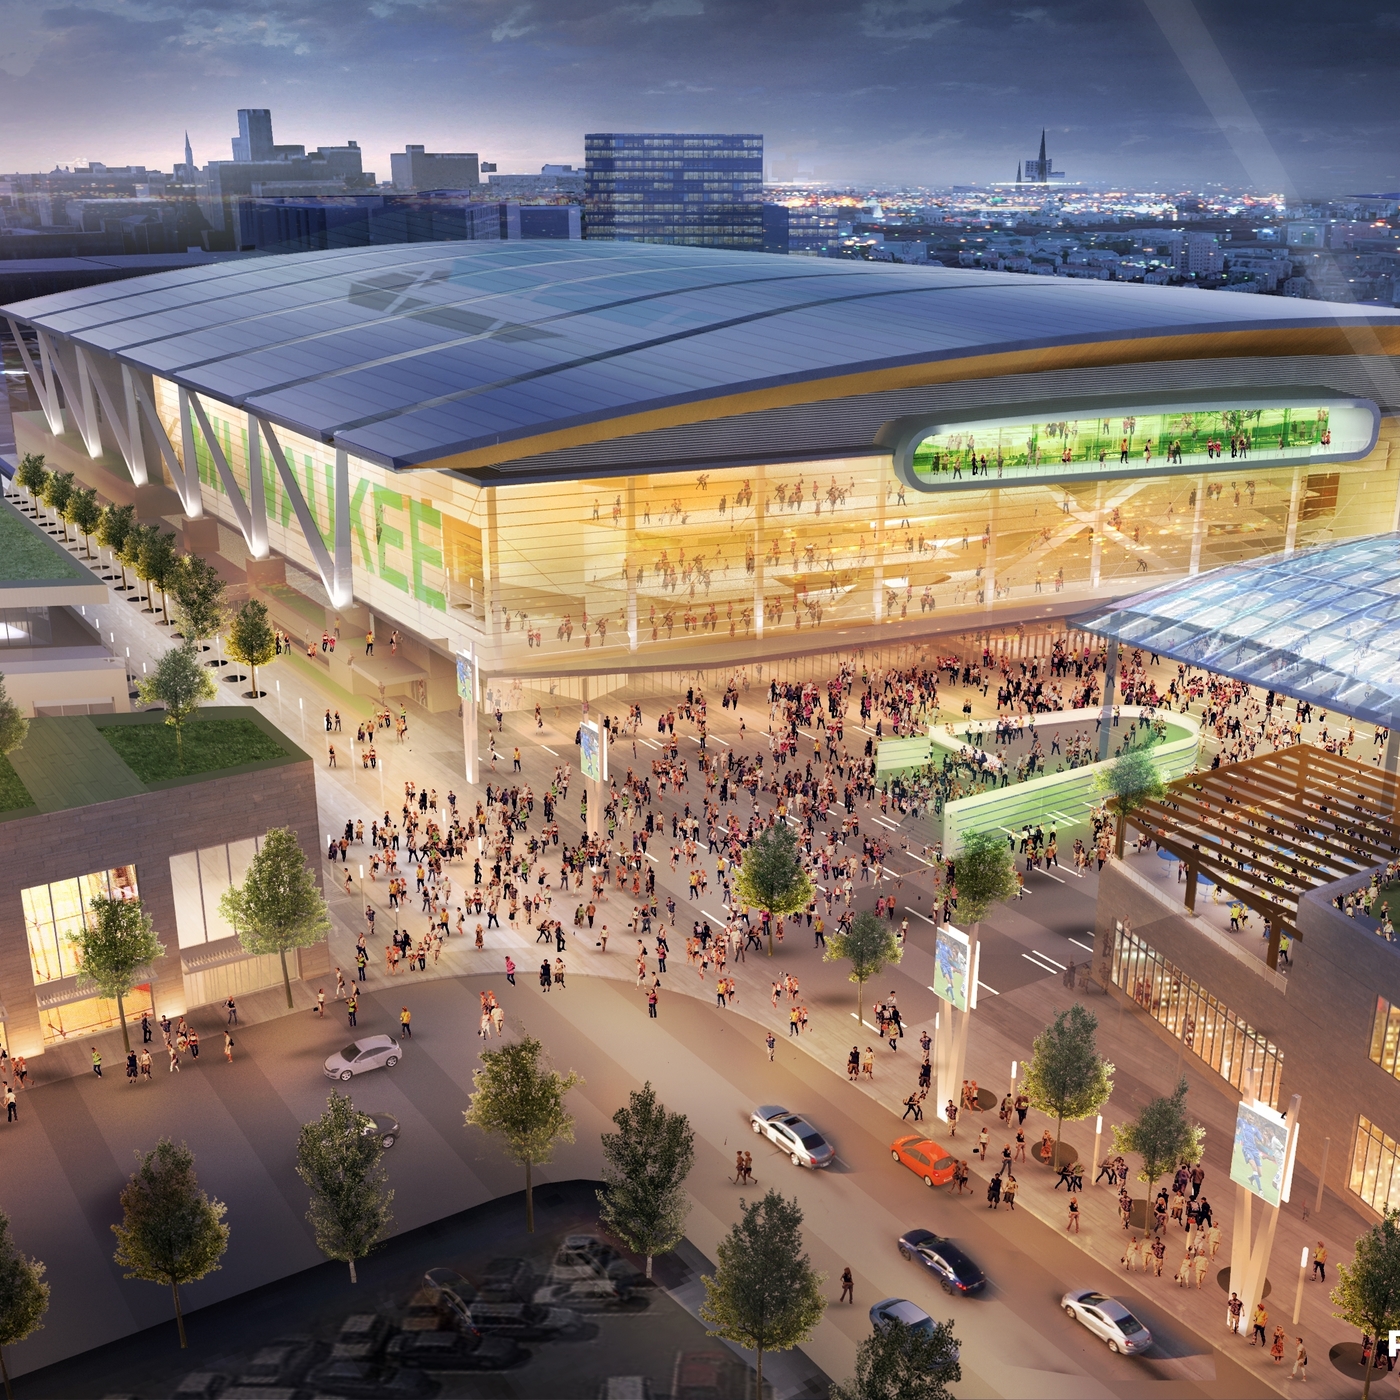 Bucks will get new arena; Cavaliers load up in offseason